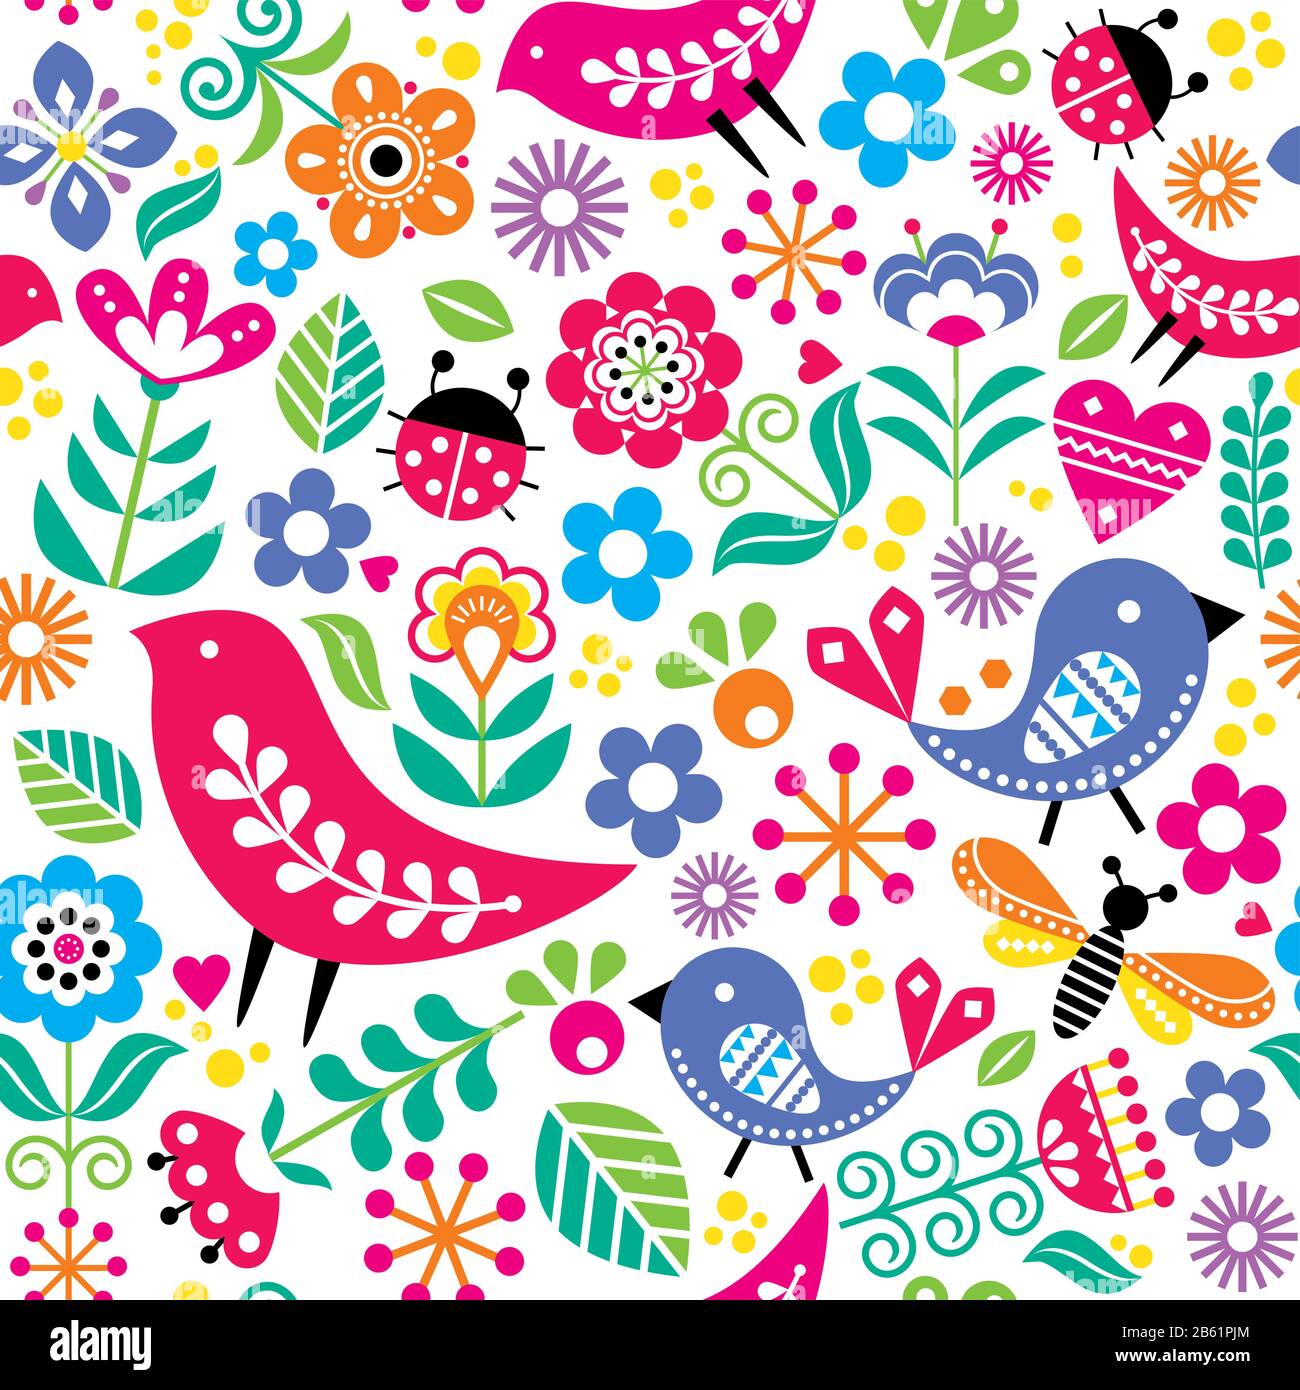 Scandinavian folk art vector seamless pattern with birds, flowers, spirng happy textile design inspired by traditional embroidery from Sweden, Norway Stock Vector